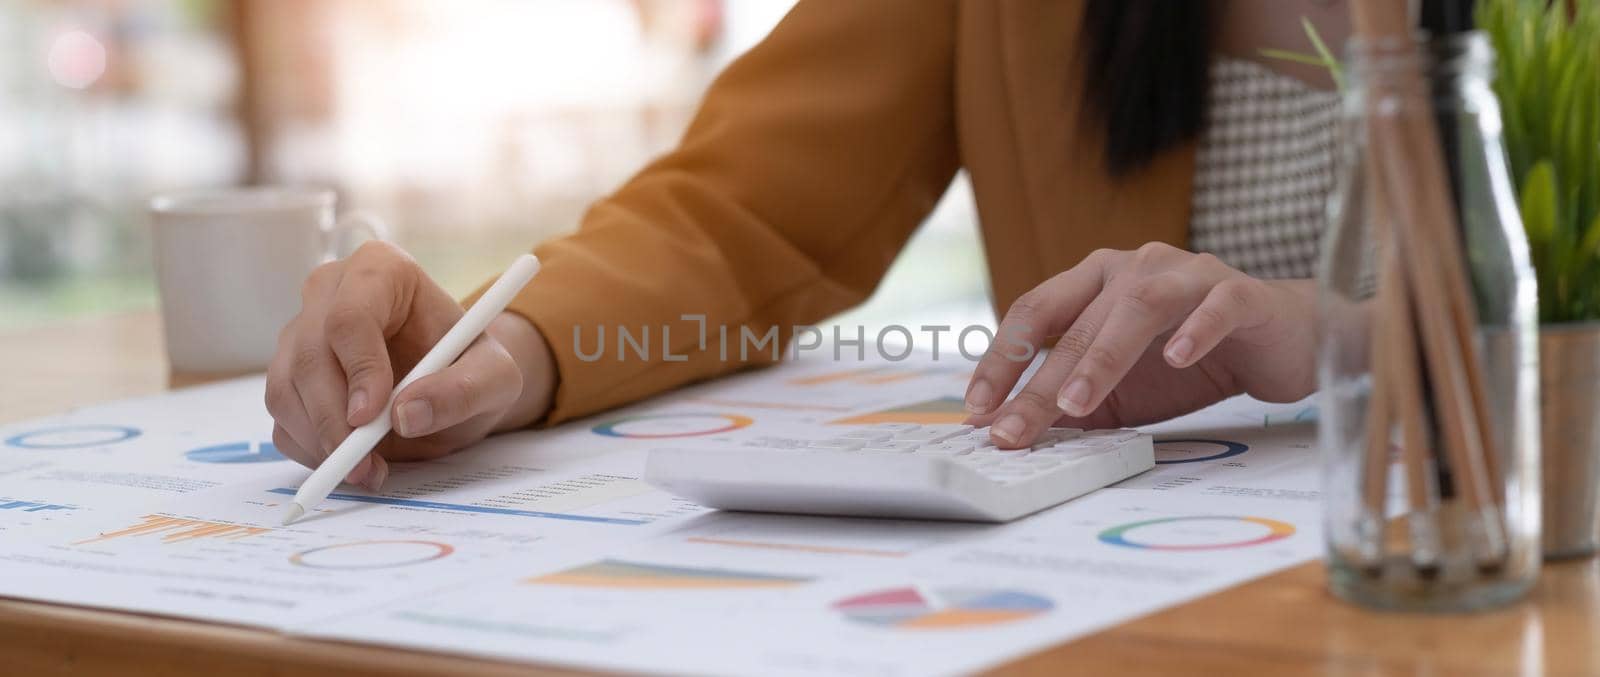 Business woman using calculator to calculate financial report, working at office with laptop computer on table. Asian female accountant or banker making calculations. finances and economy concept by wichayada